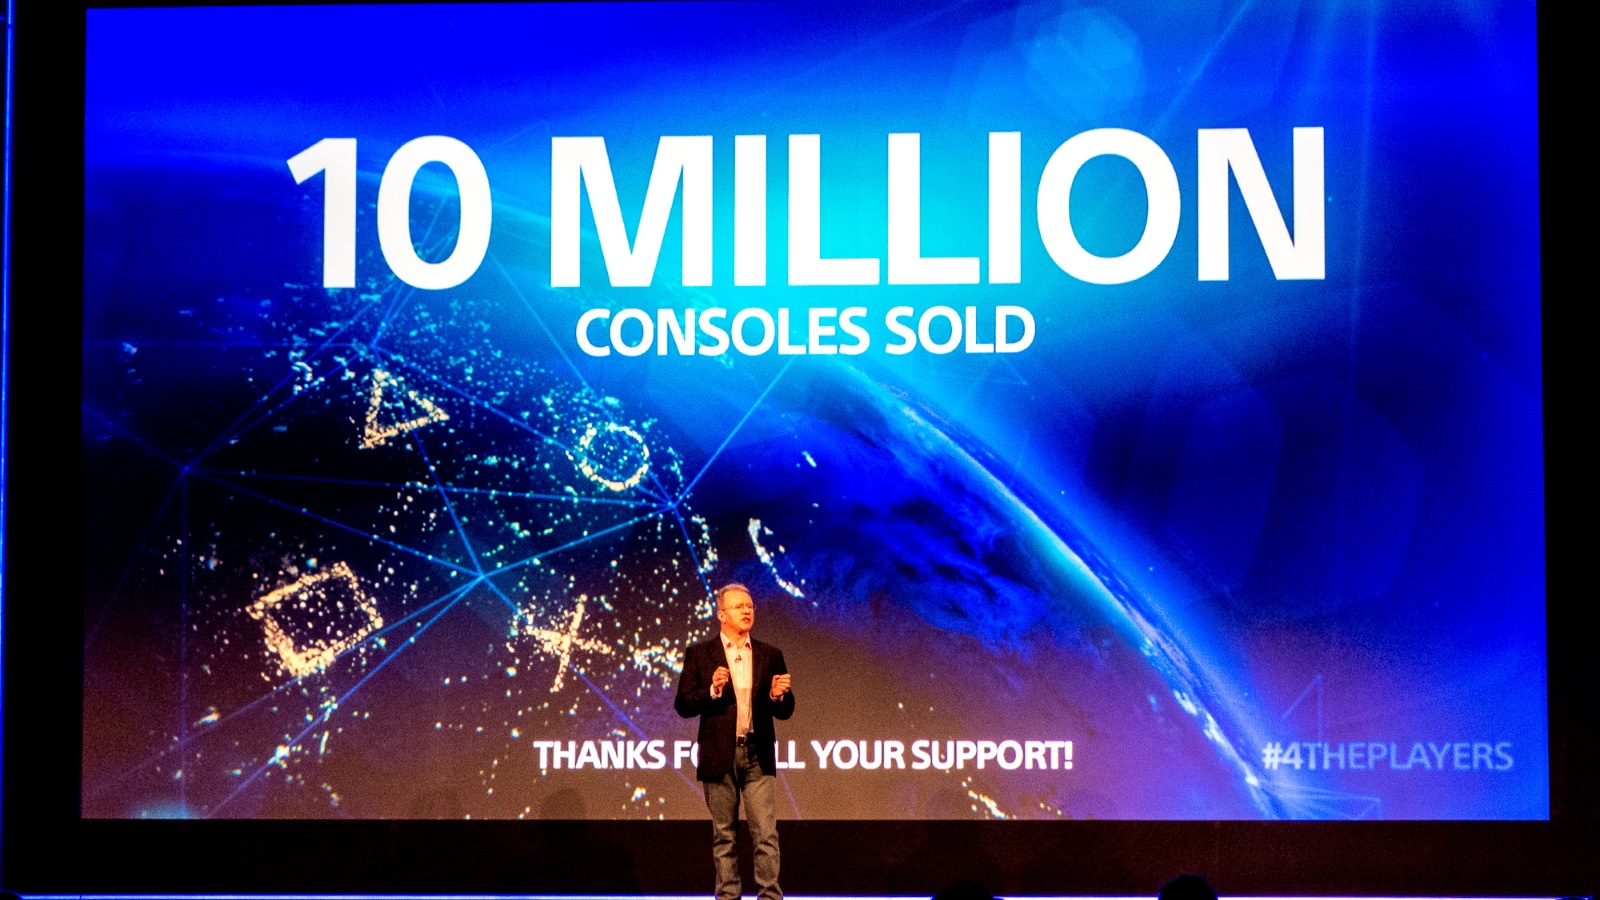 PS4 Has Some Big Sales Numbers